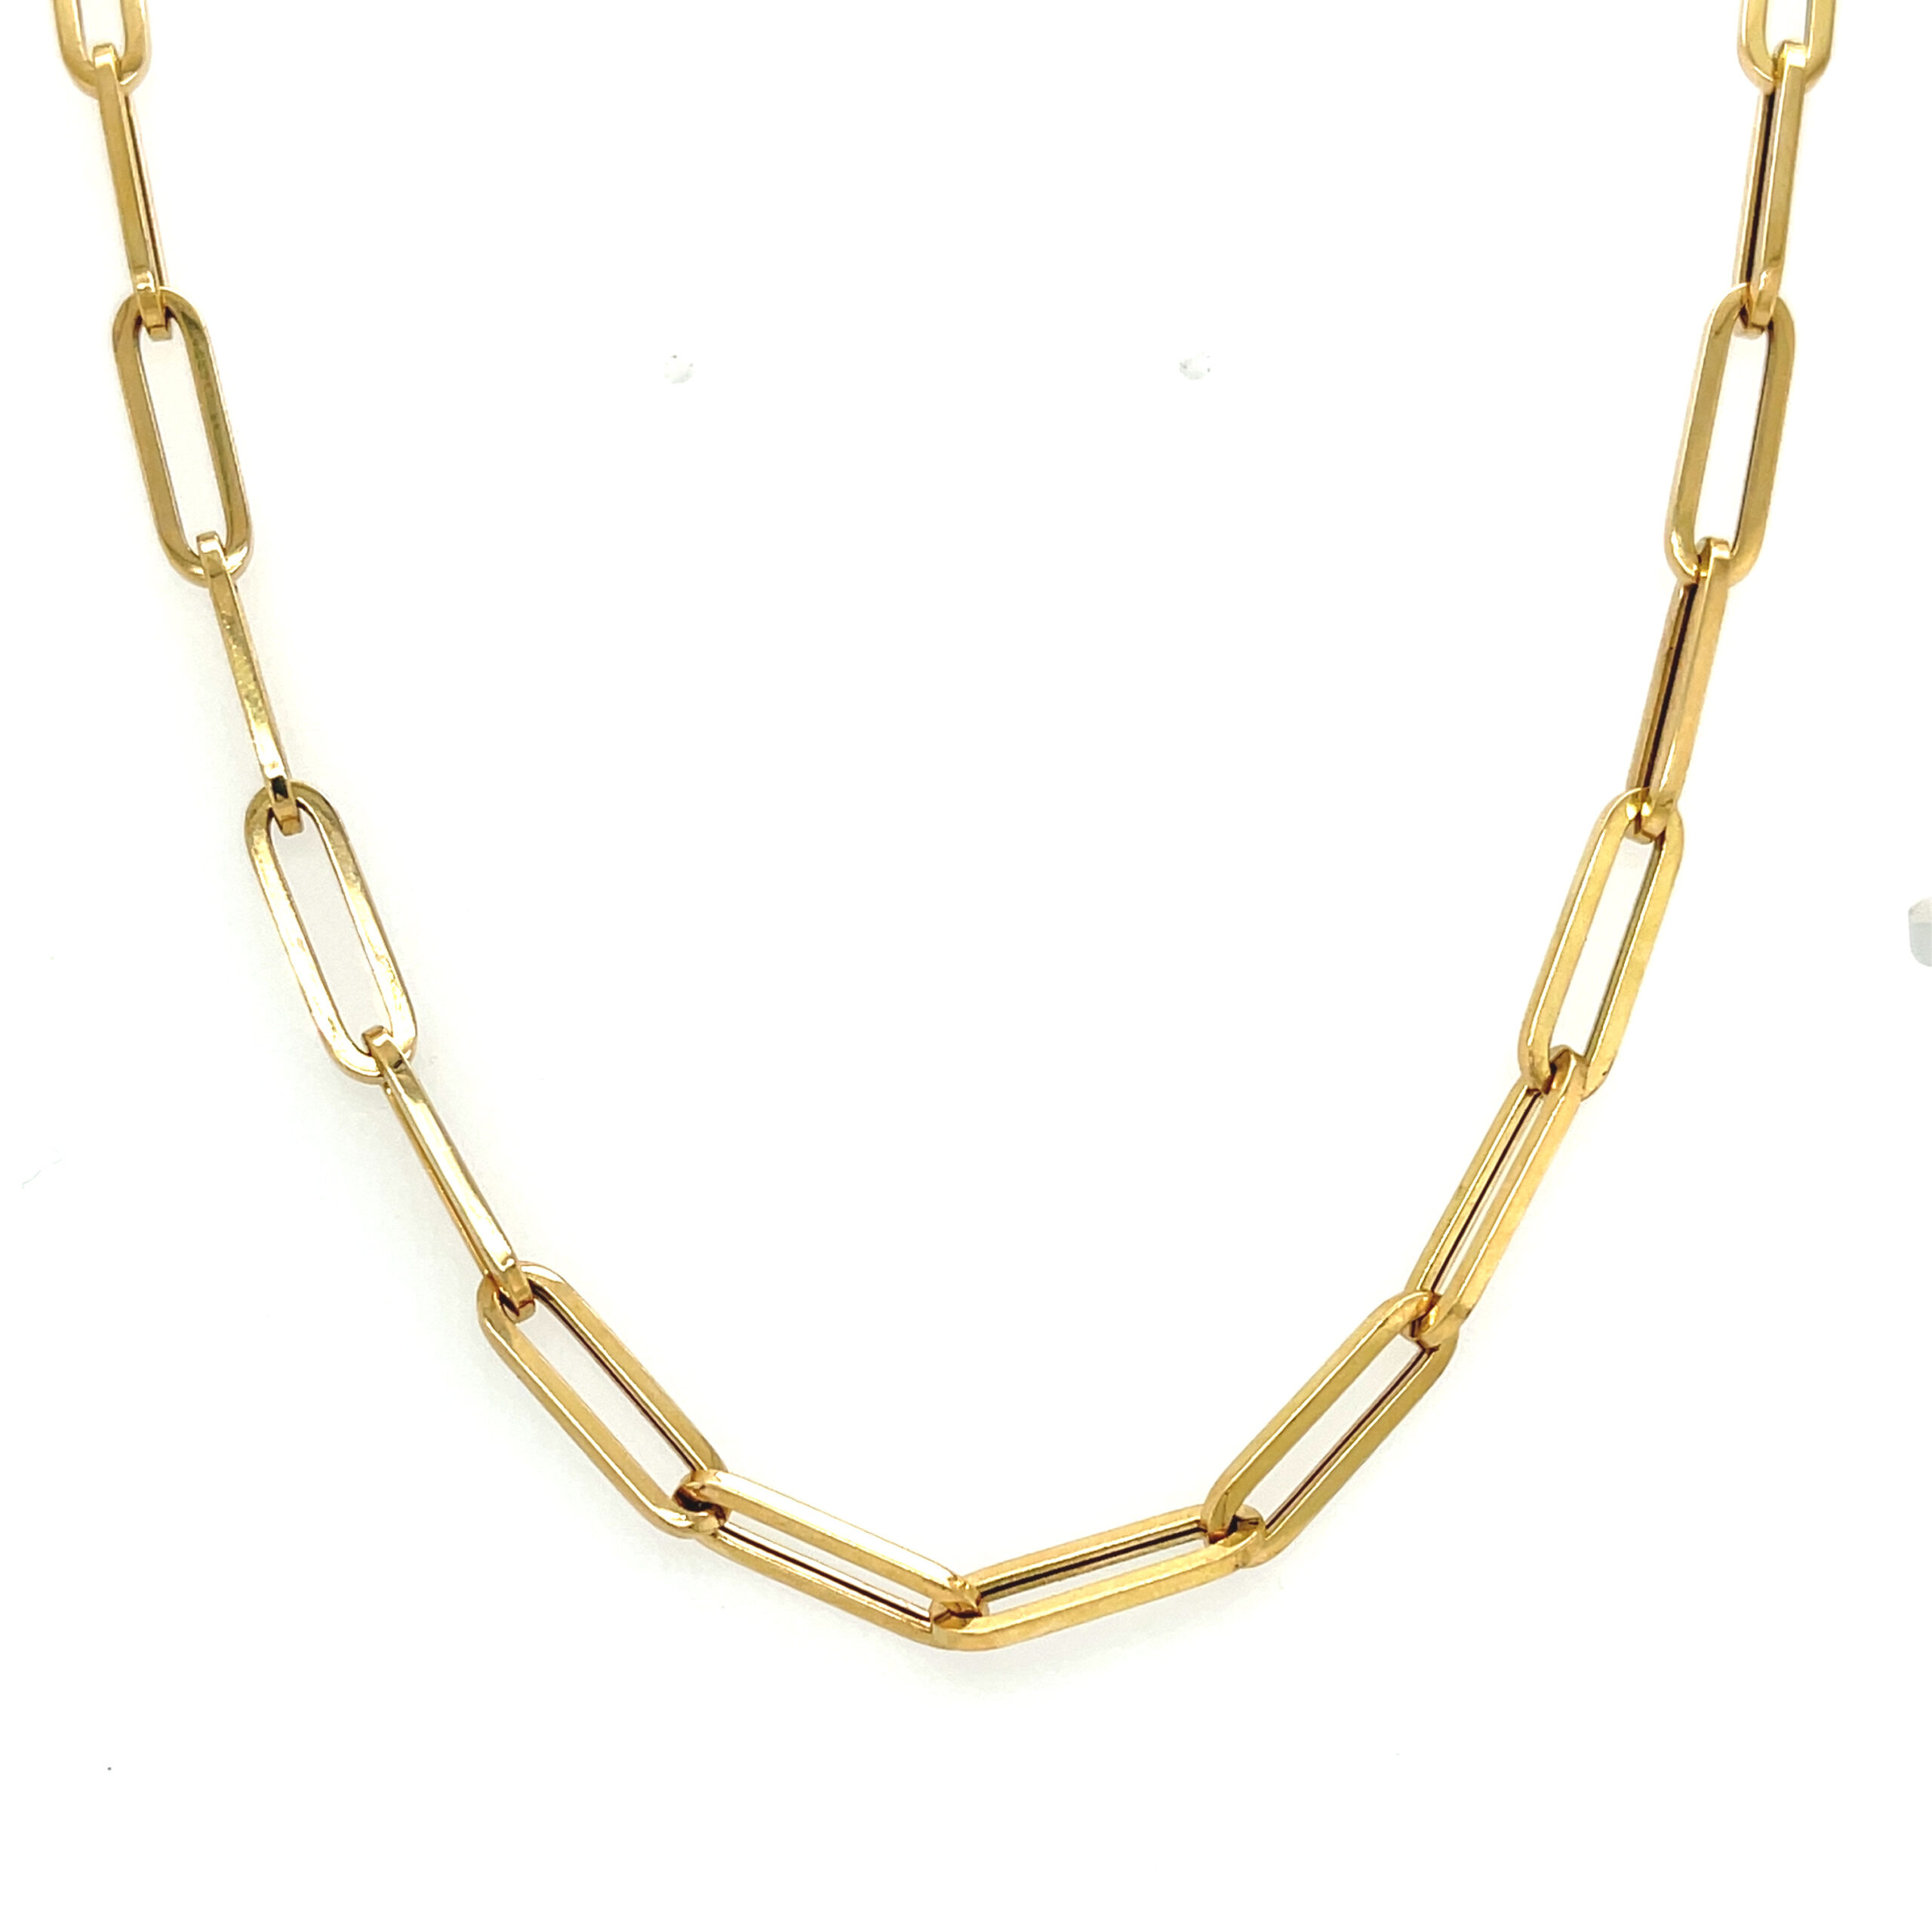 Featured image for “Chunky Paperclip Necklace”